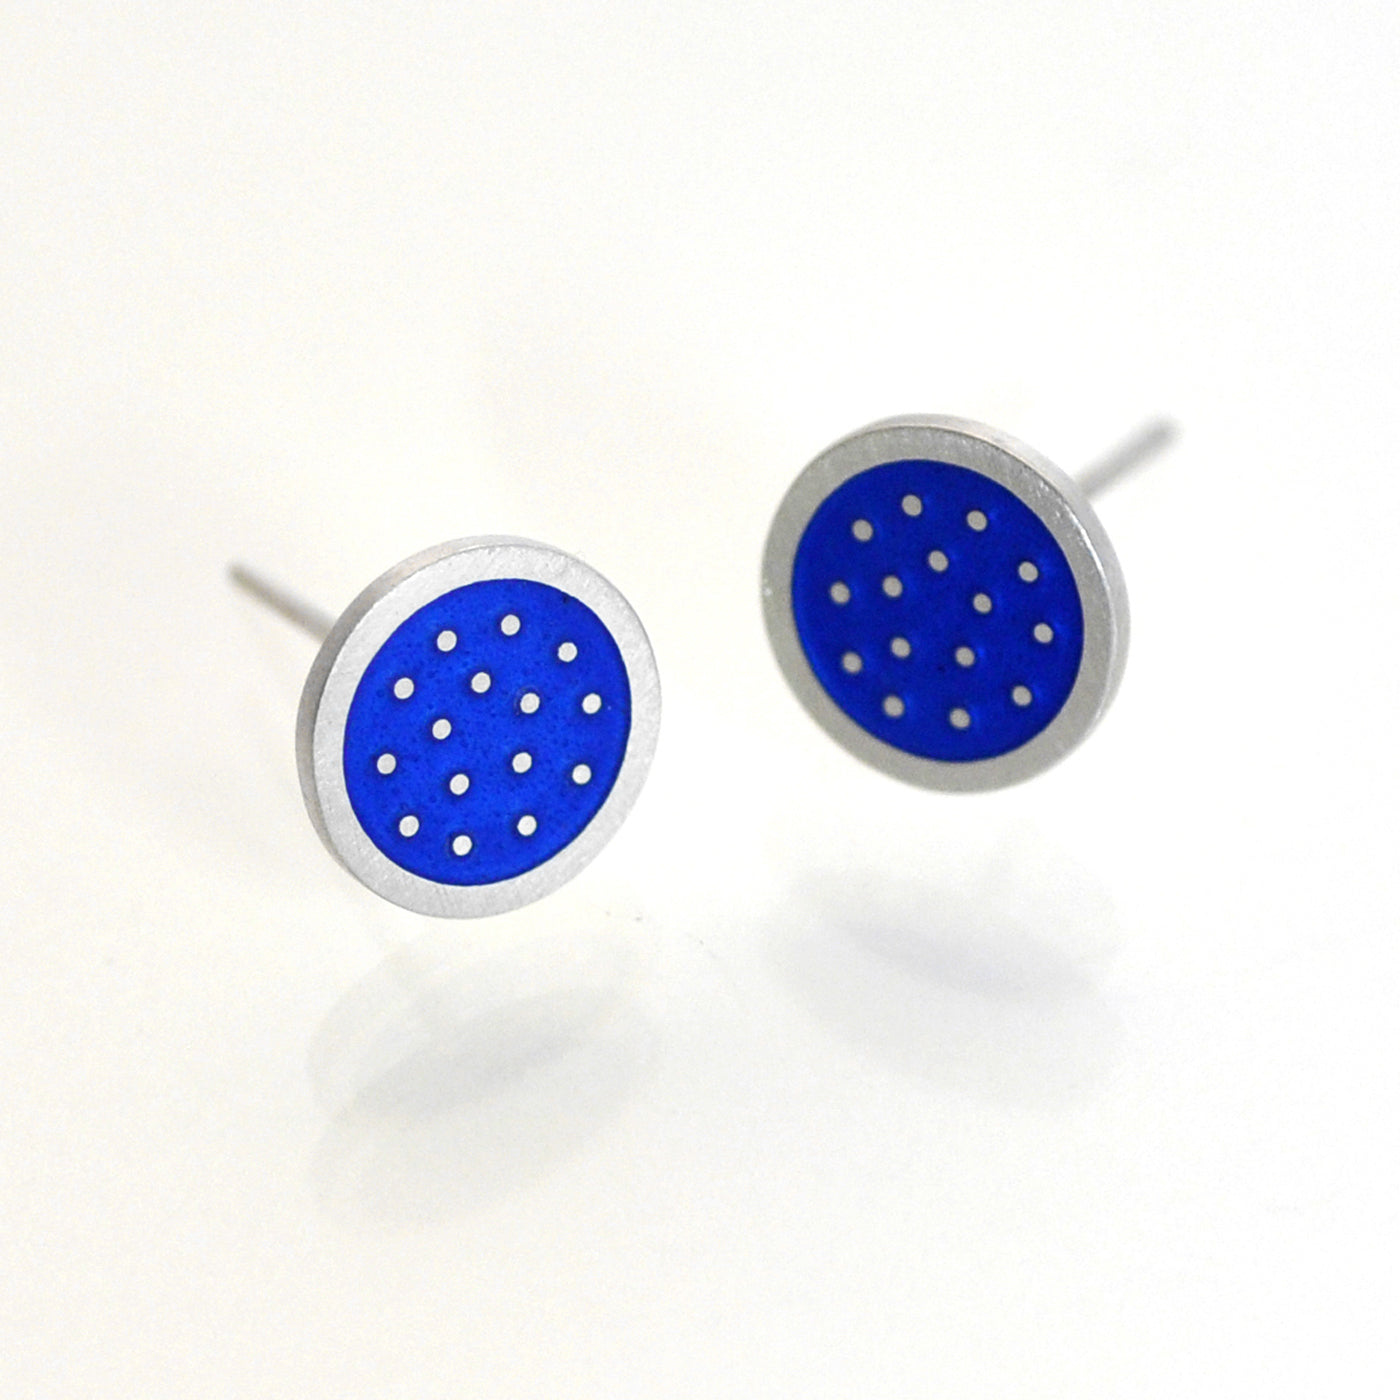 Dotty silver and enamelled earrings, mid-blue